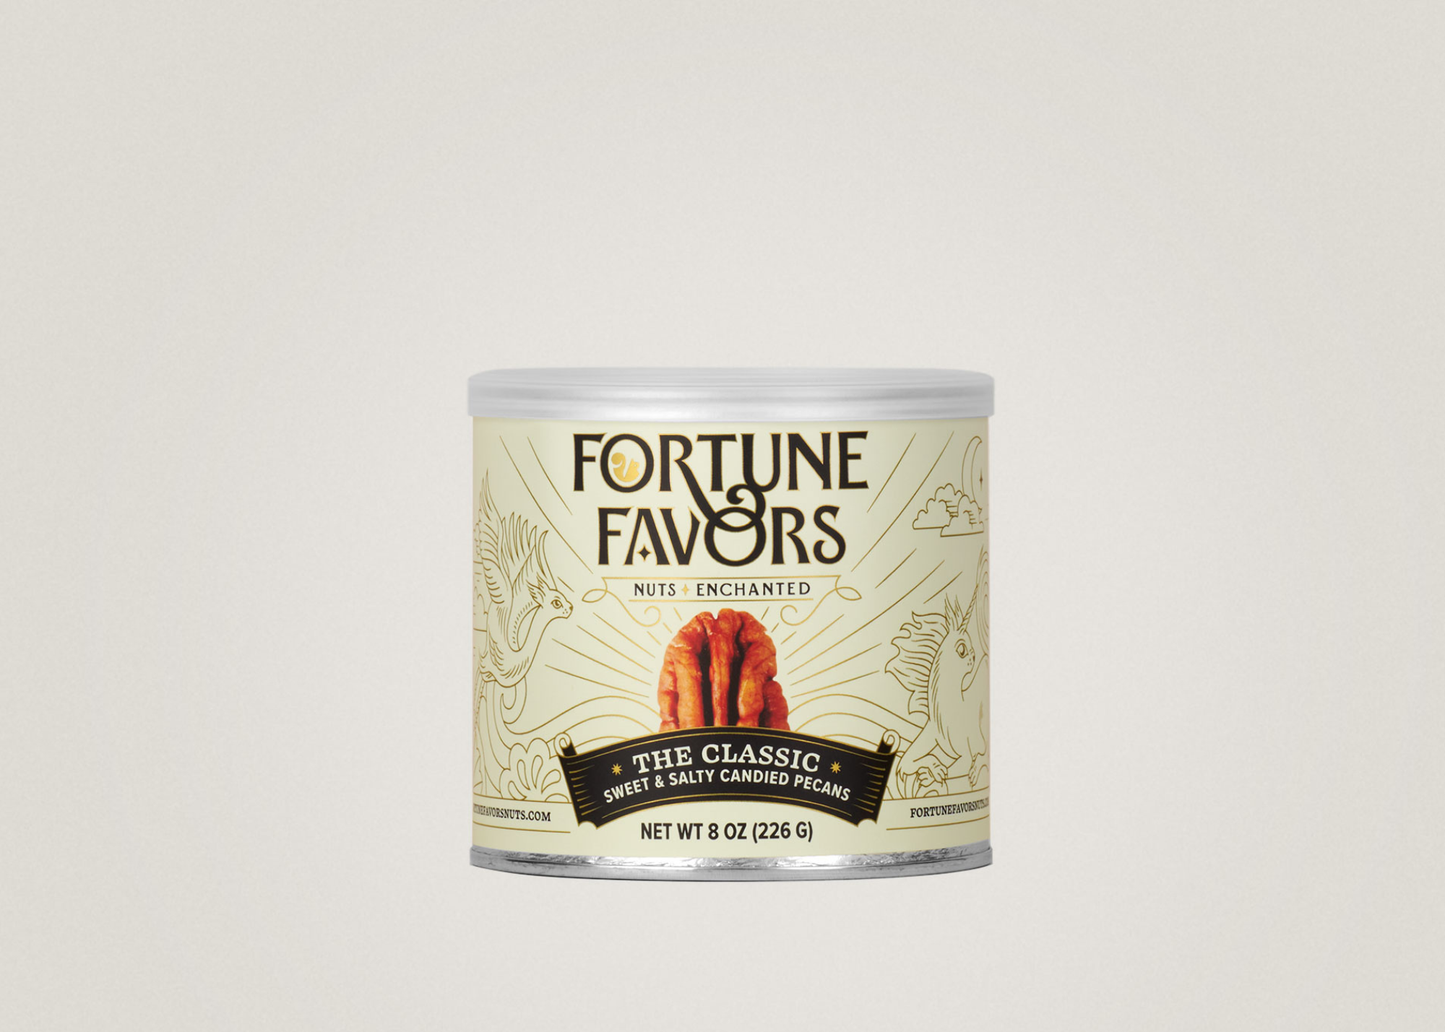 Fortune Favors The Classic Candied Pecans 8 oz